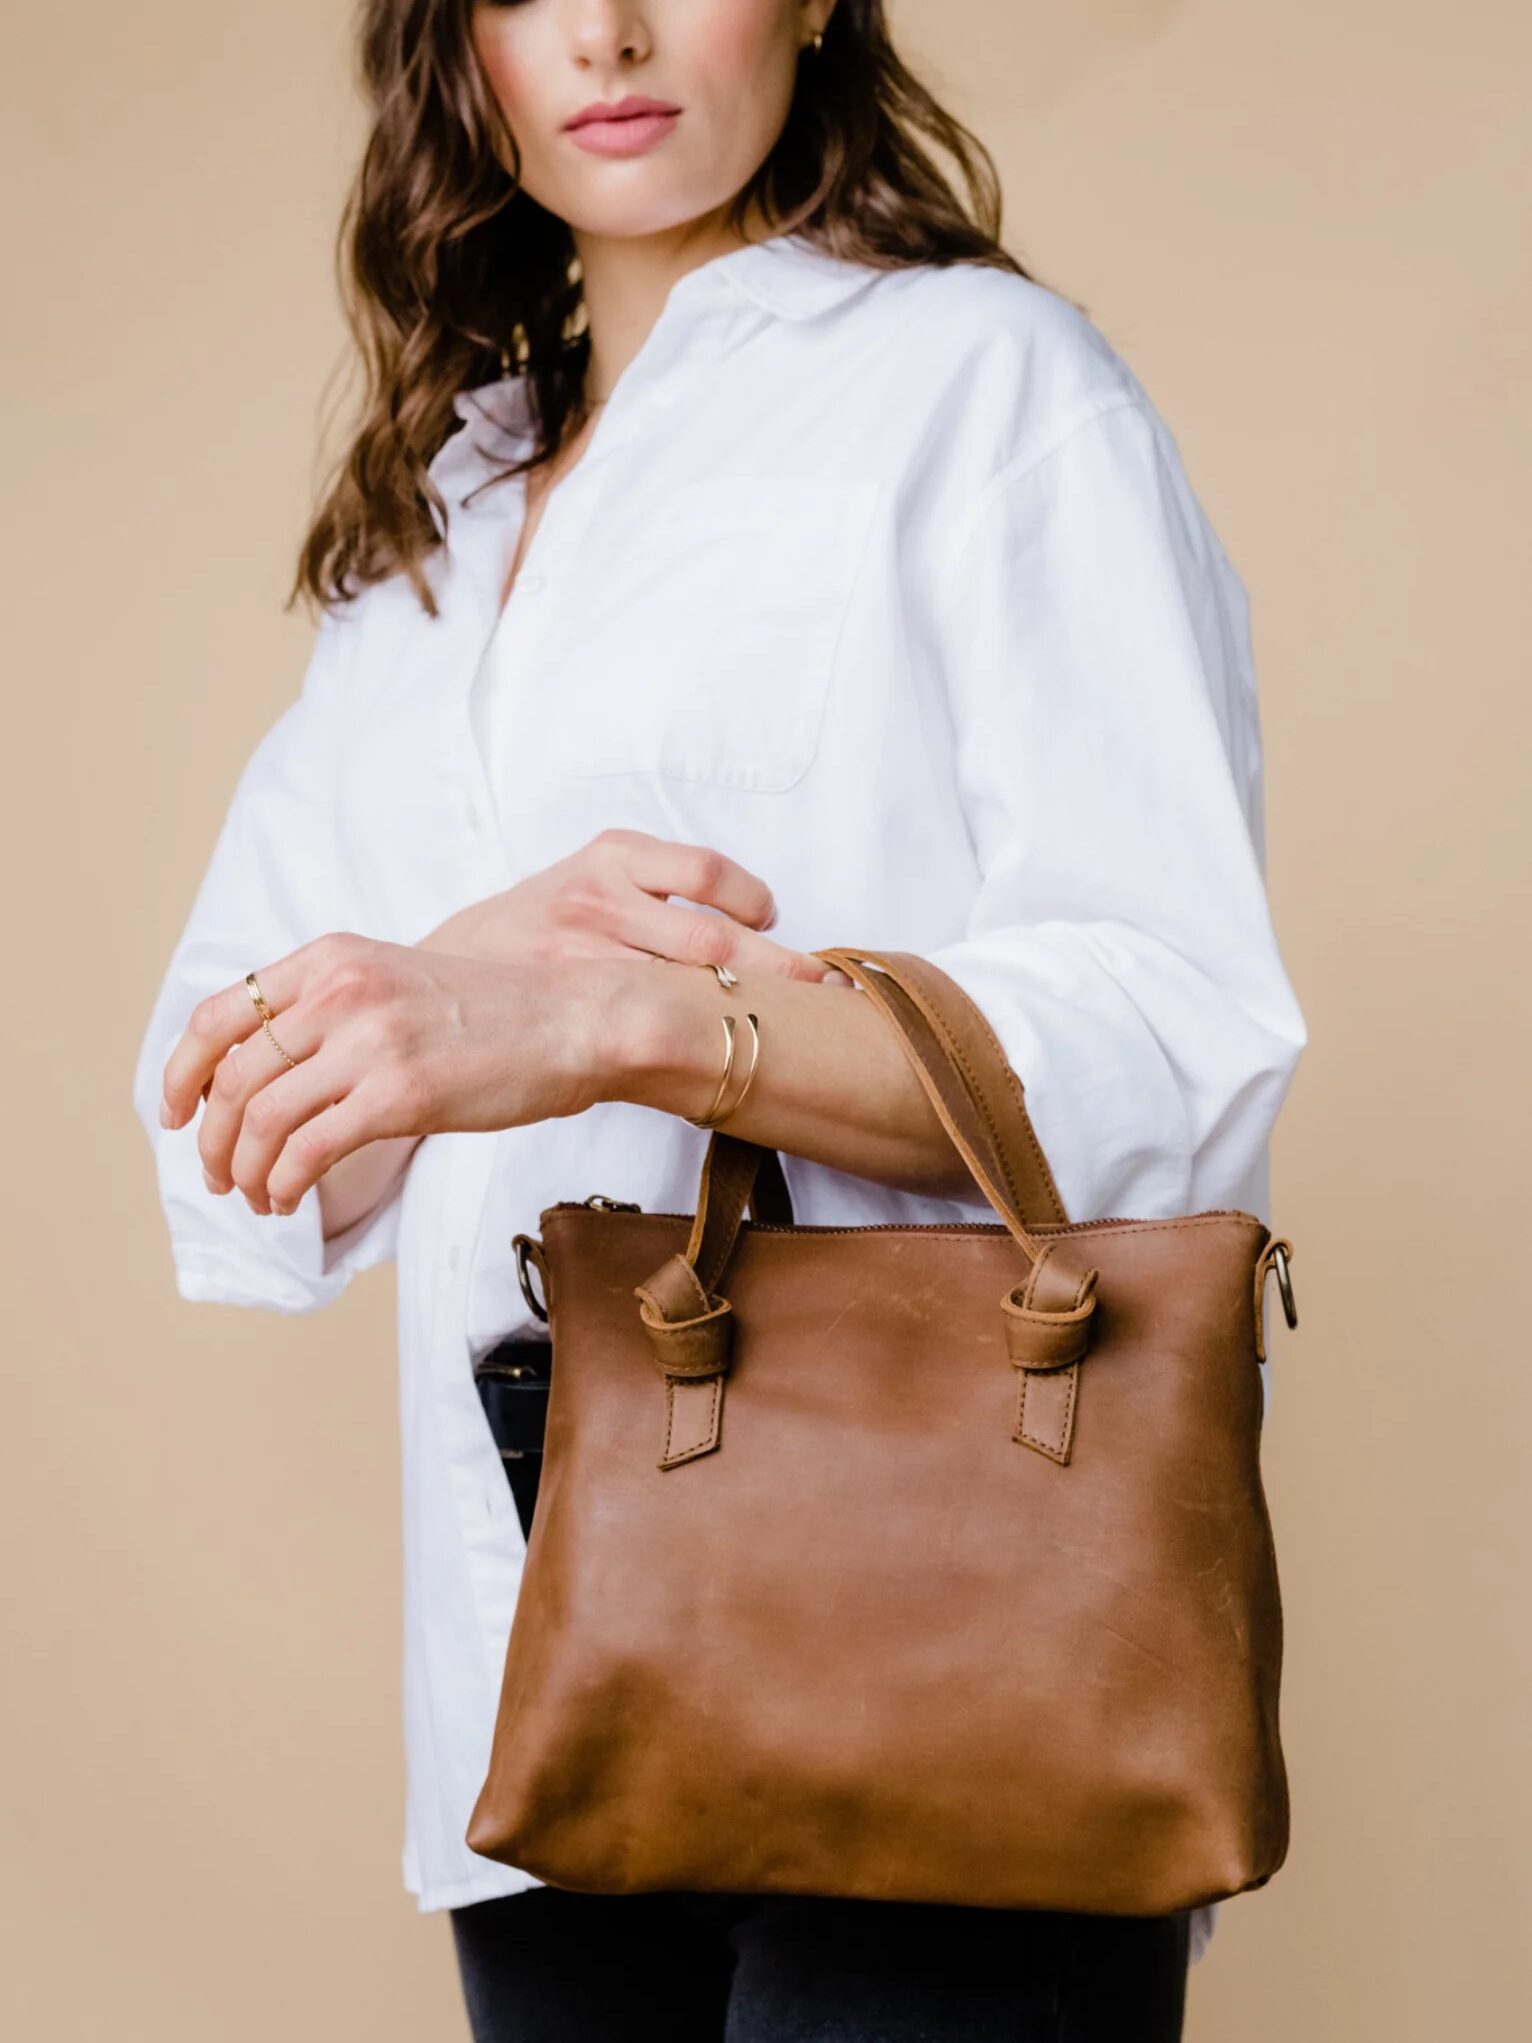 Woman holding a brown leather bag while wearing a white blouse.